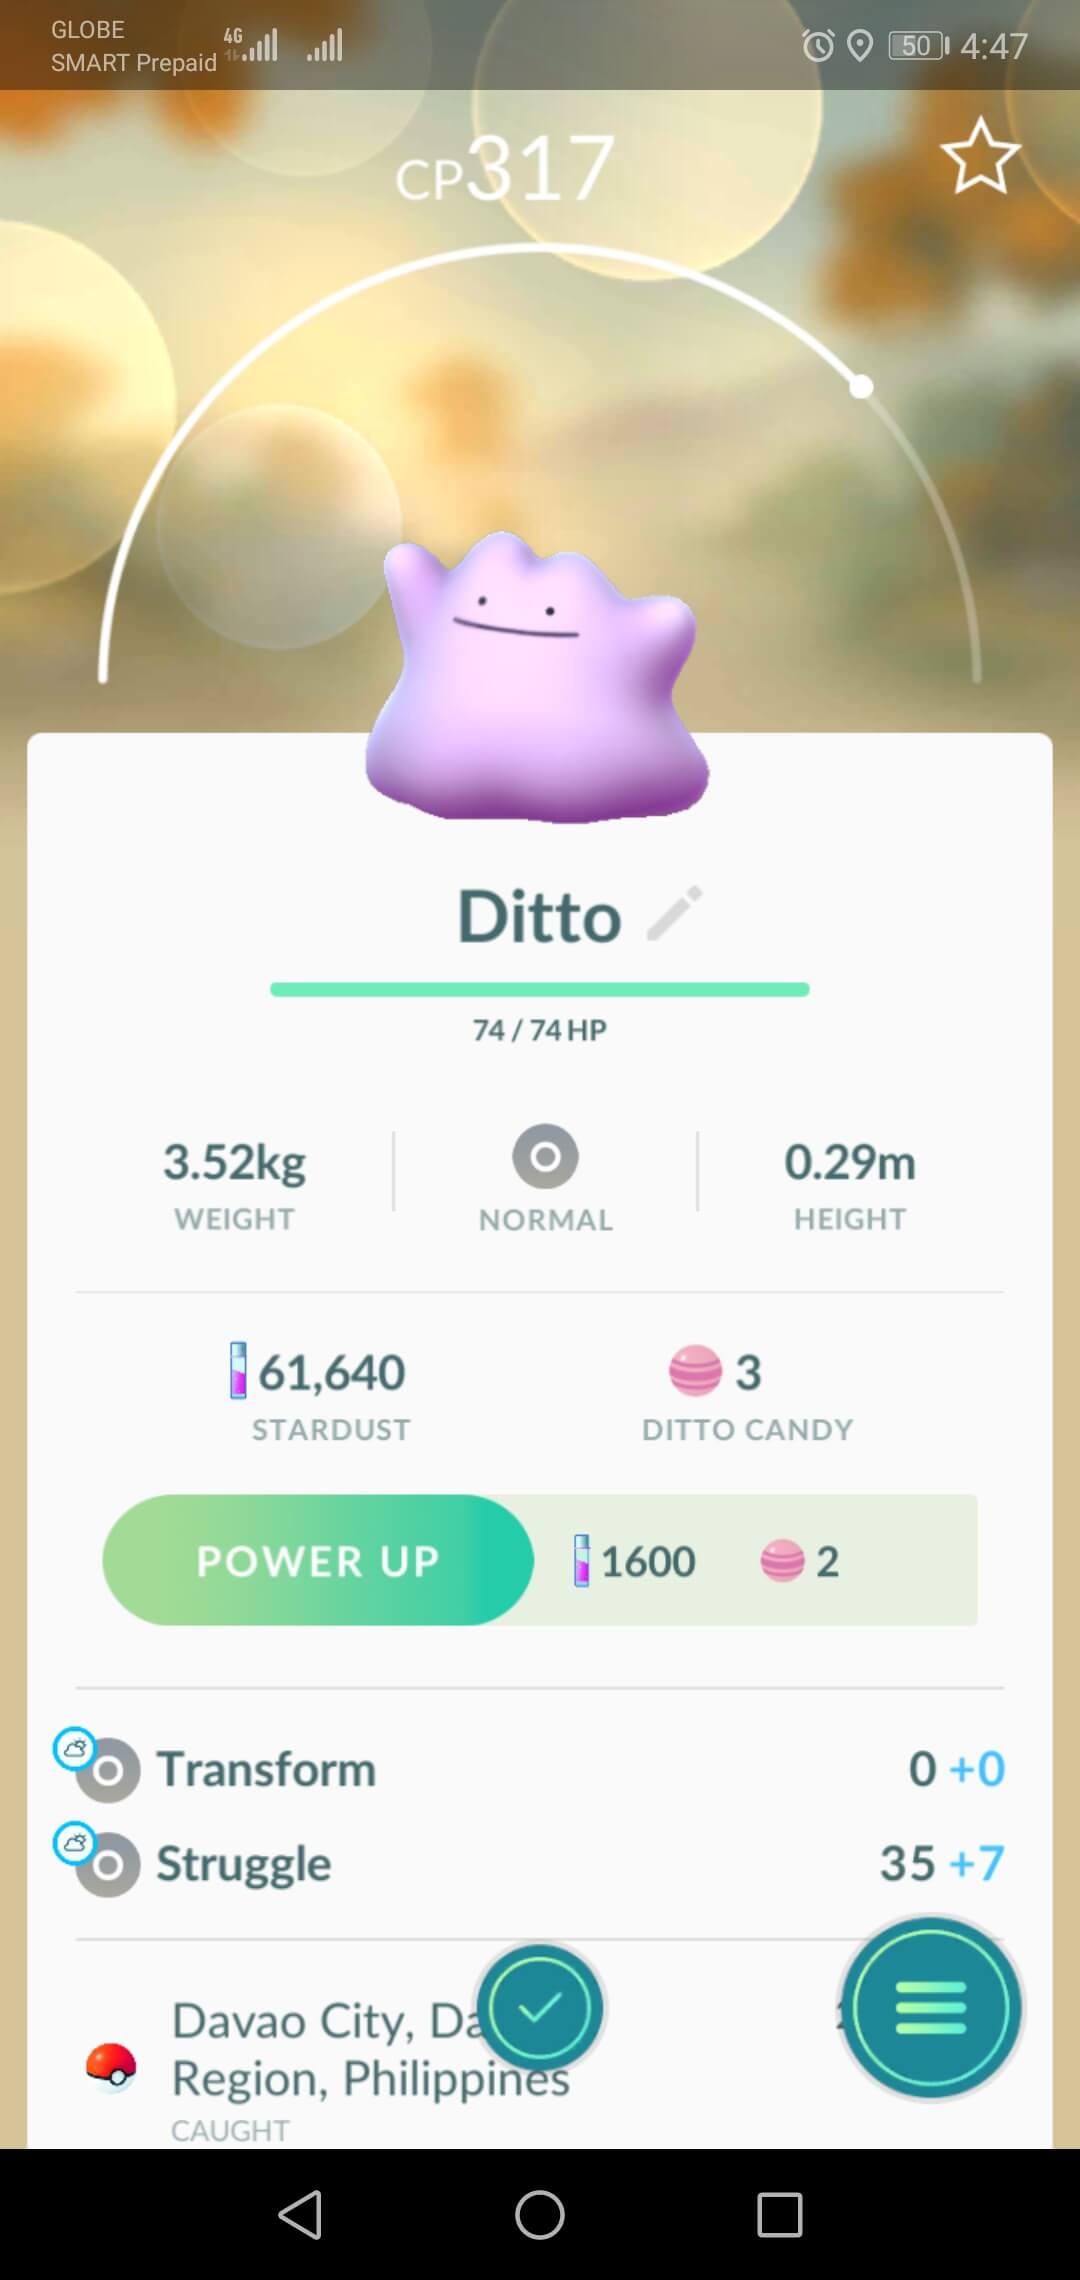 Tips for Catching Ditto in Pokémon Go